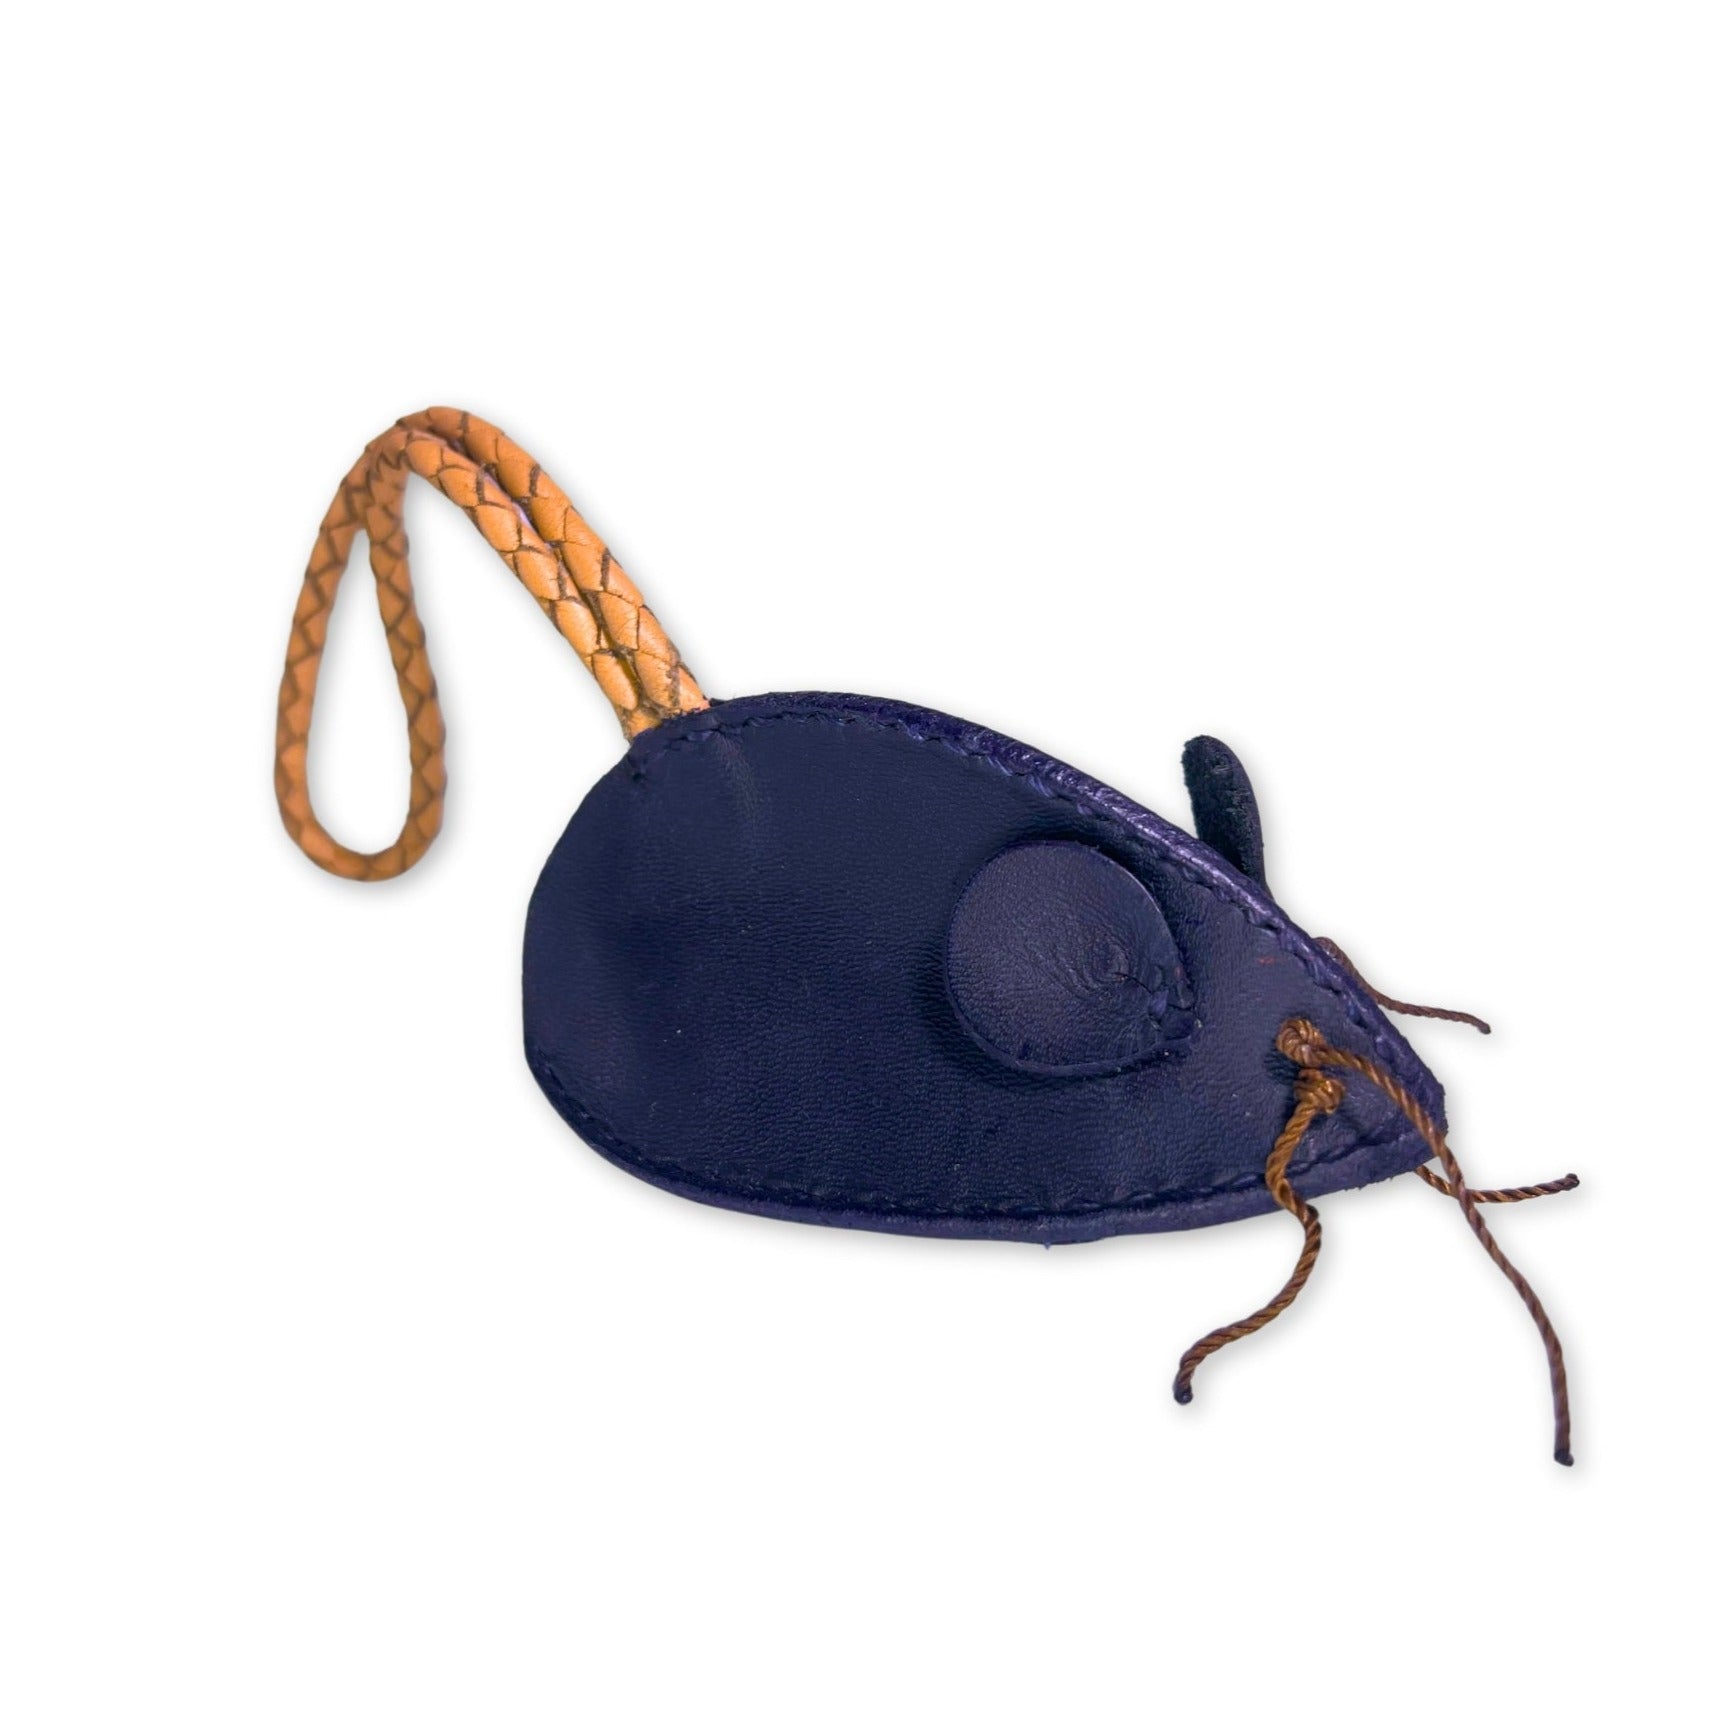 A whimsical Georgie Paws navy blue leather Mouse Poobag Dispenser with a braided leather tail and charming stitch detail, designed to hold poo bags, isolated on a white background.